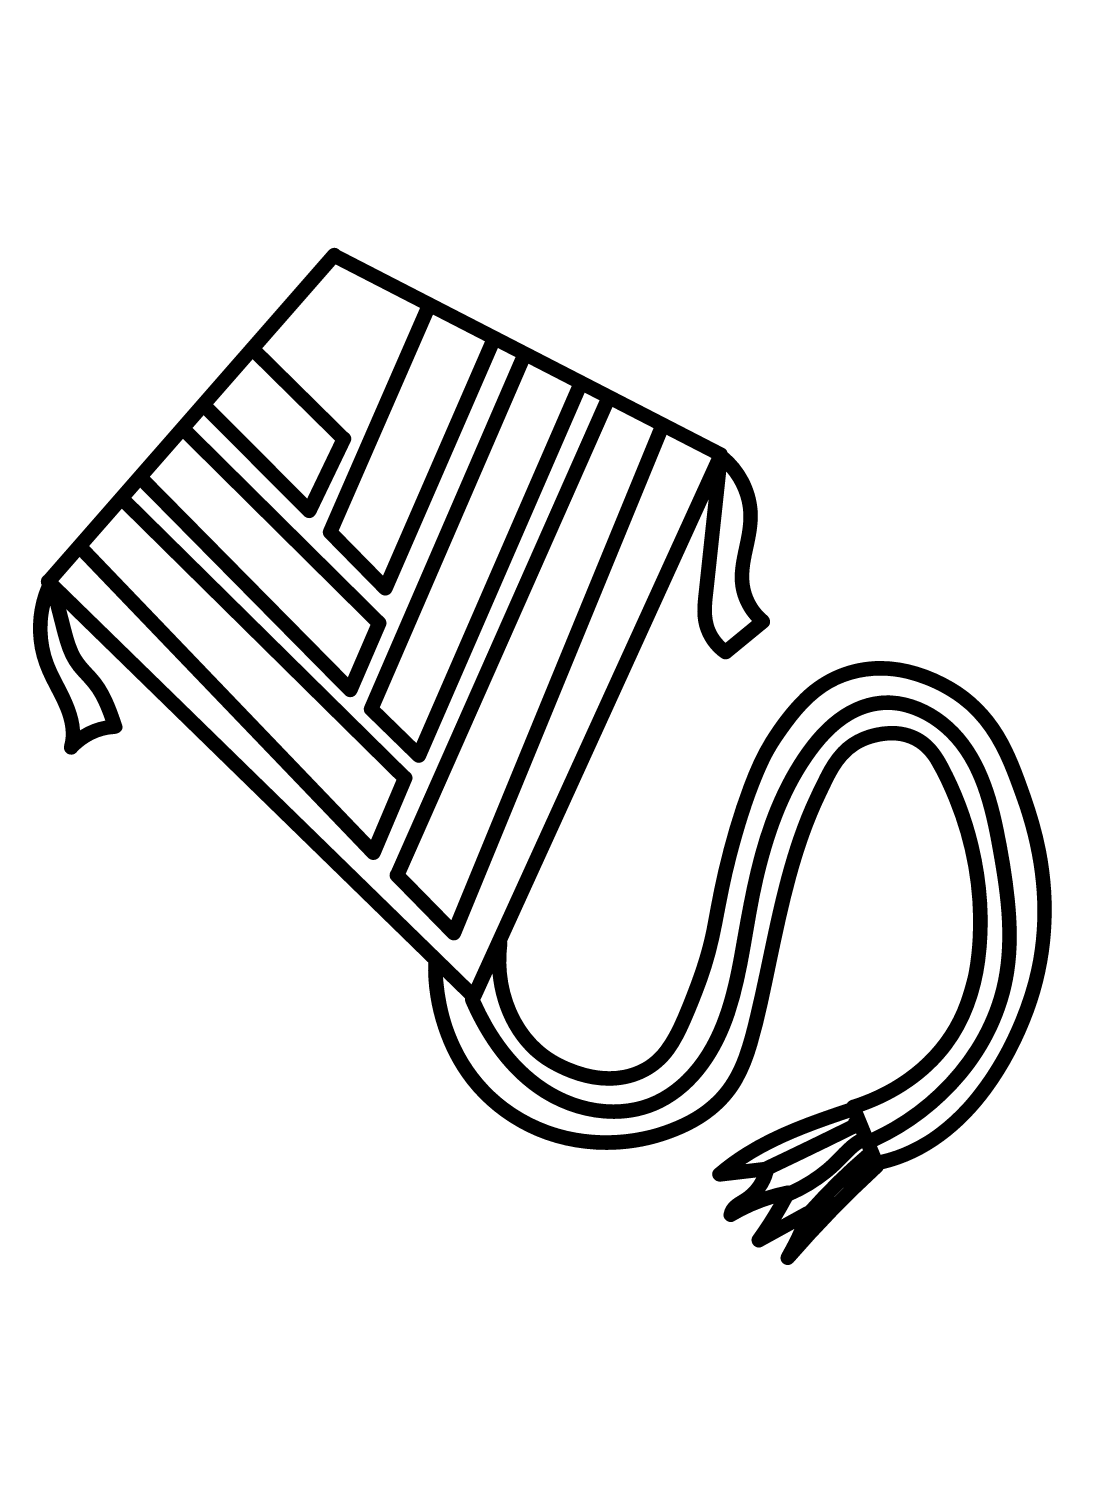 Kite Easy Coloring Page